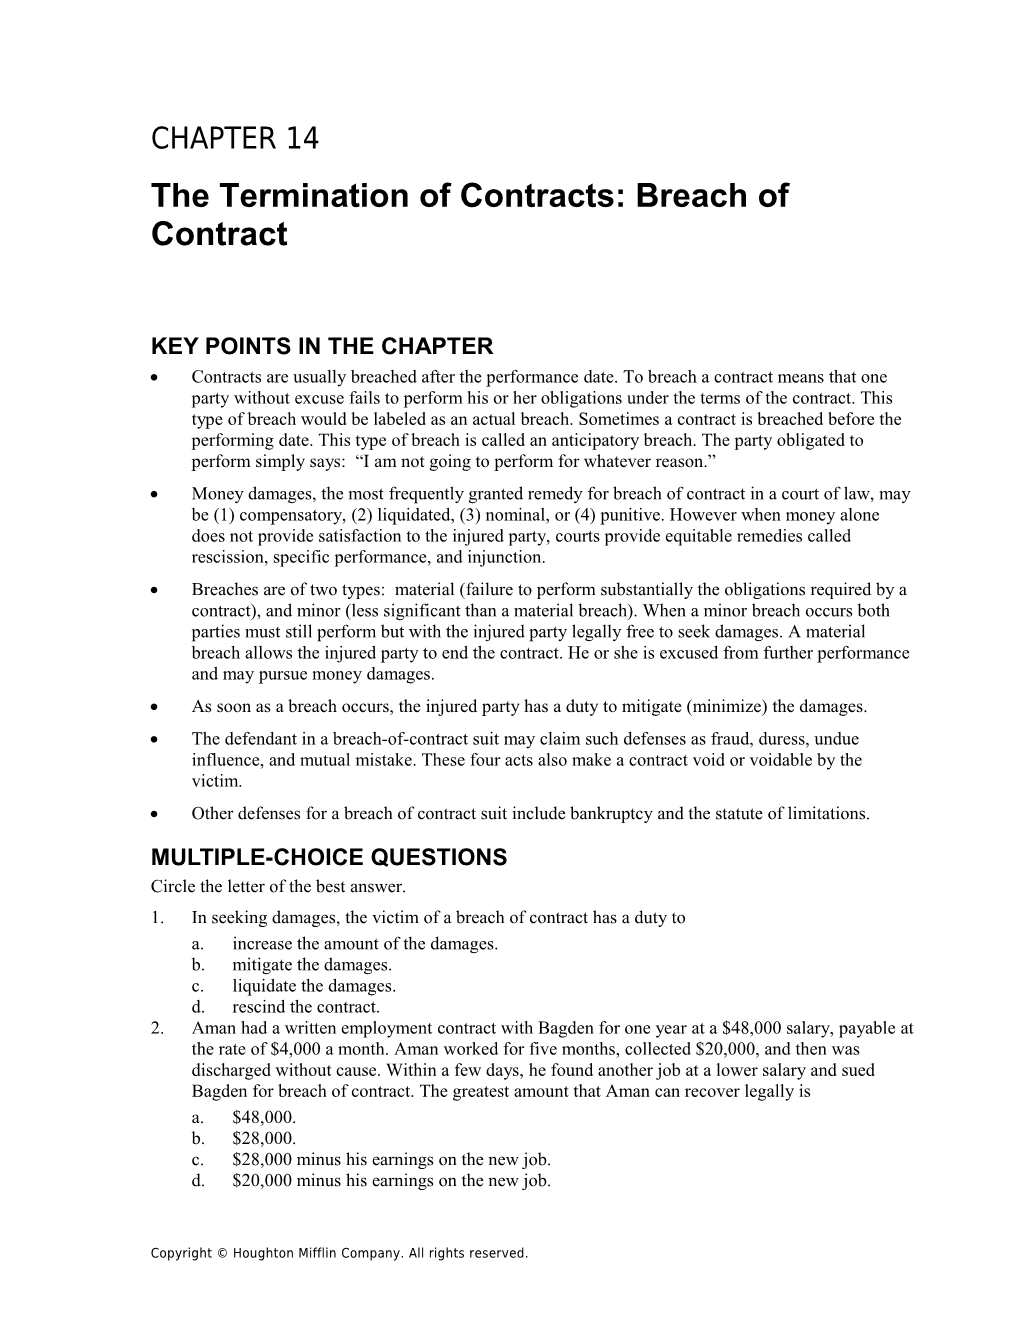 Chapter 14: the Termination of Contracts: Breach of Contract 1